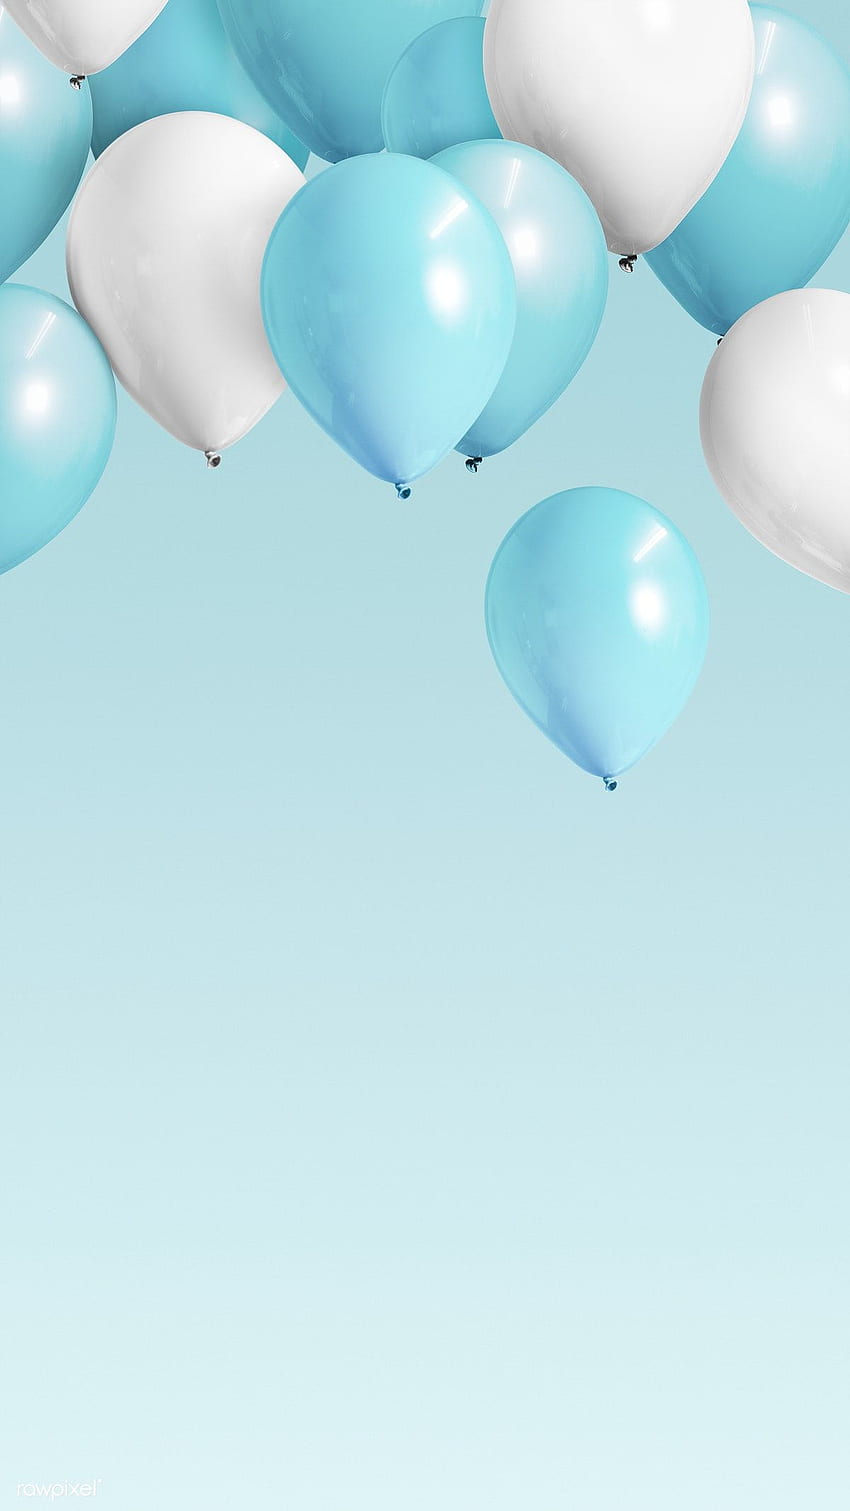 premium psd / of Pastel blue balloons mobile phone by Jubjang about blue celebration balloons background, happy birtay mockup, backg. Cool for phones, Baby blue , Balloon mobile HD phone wallpaper